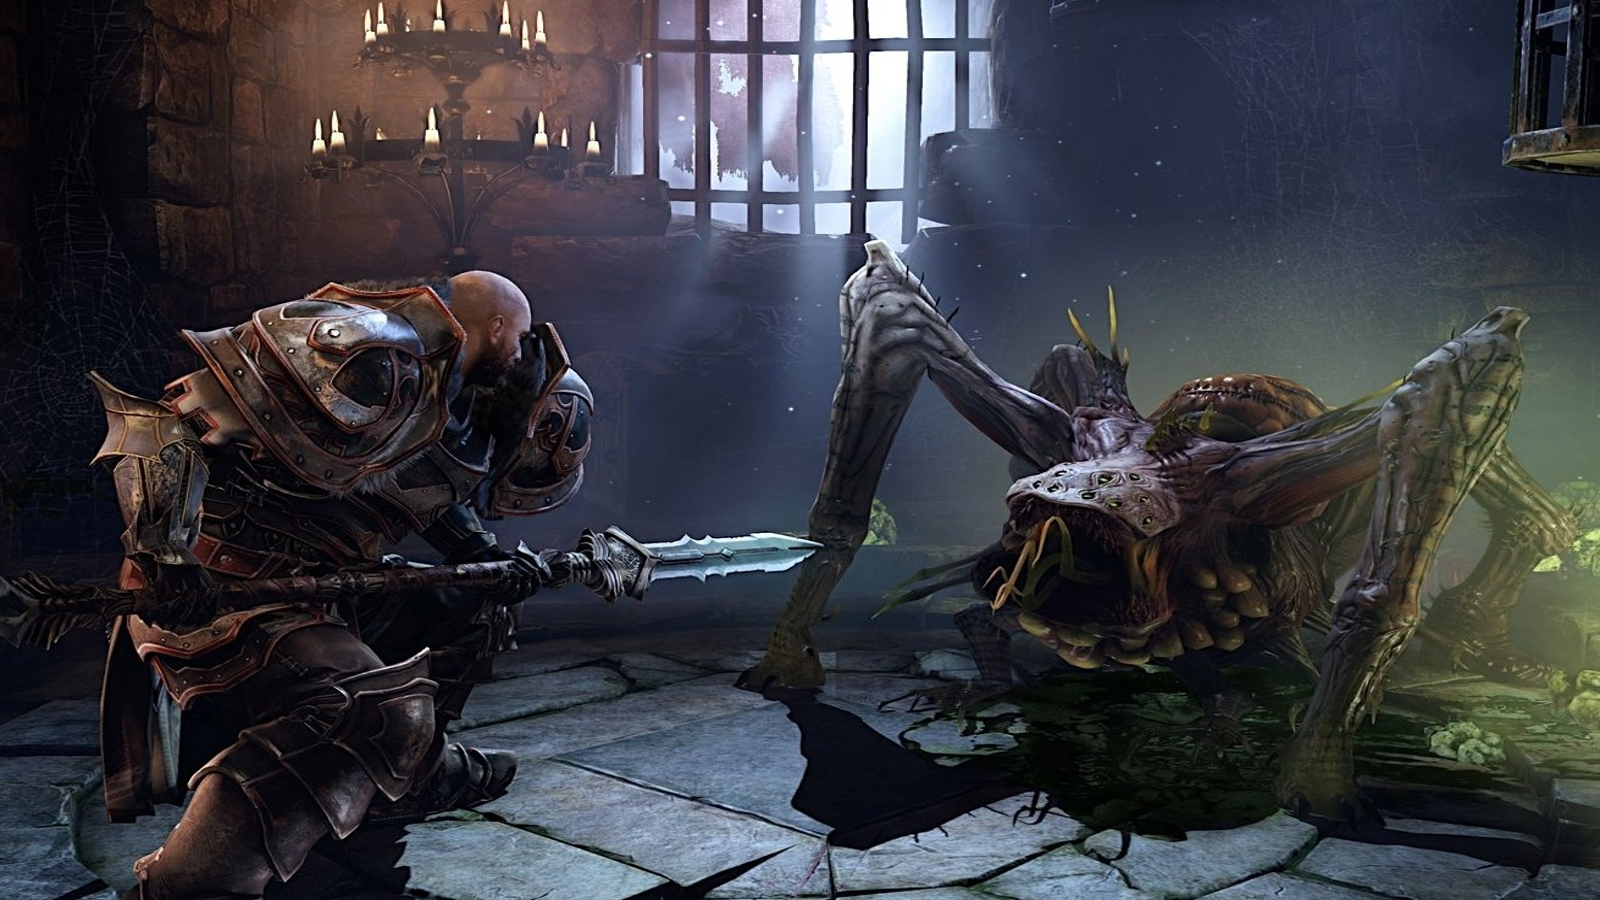 Lords of the Fallen - PC Review 